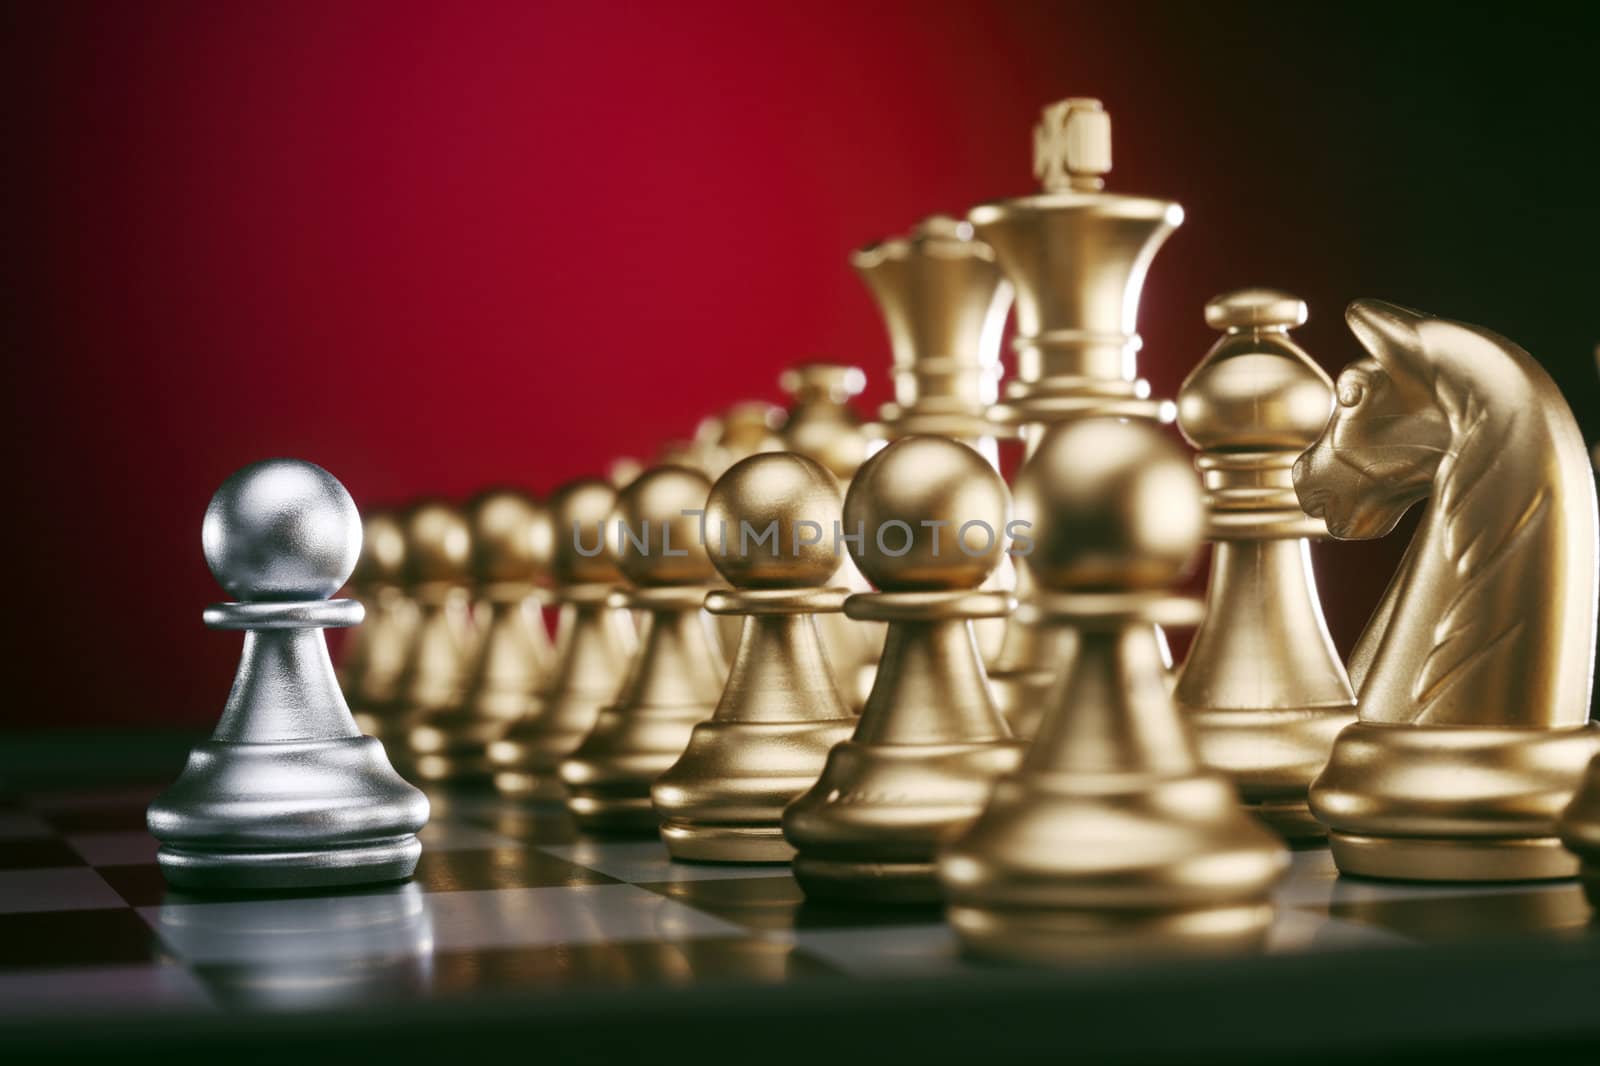 stock image of the battle of chess game